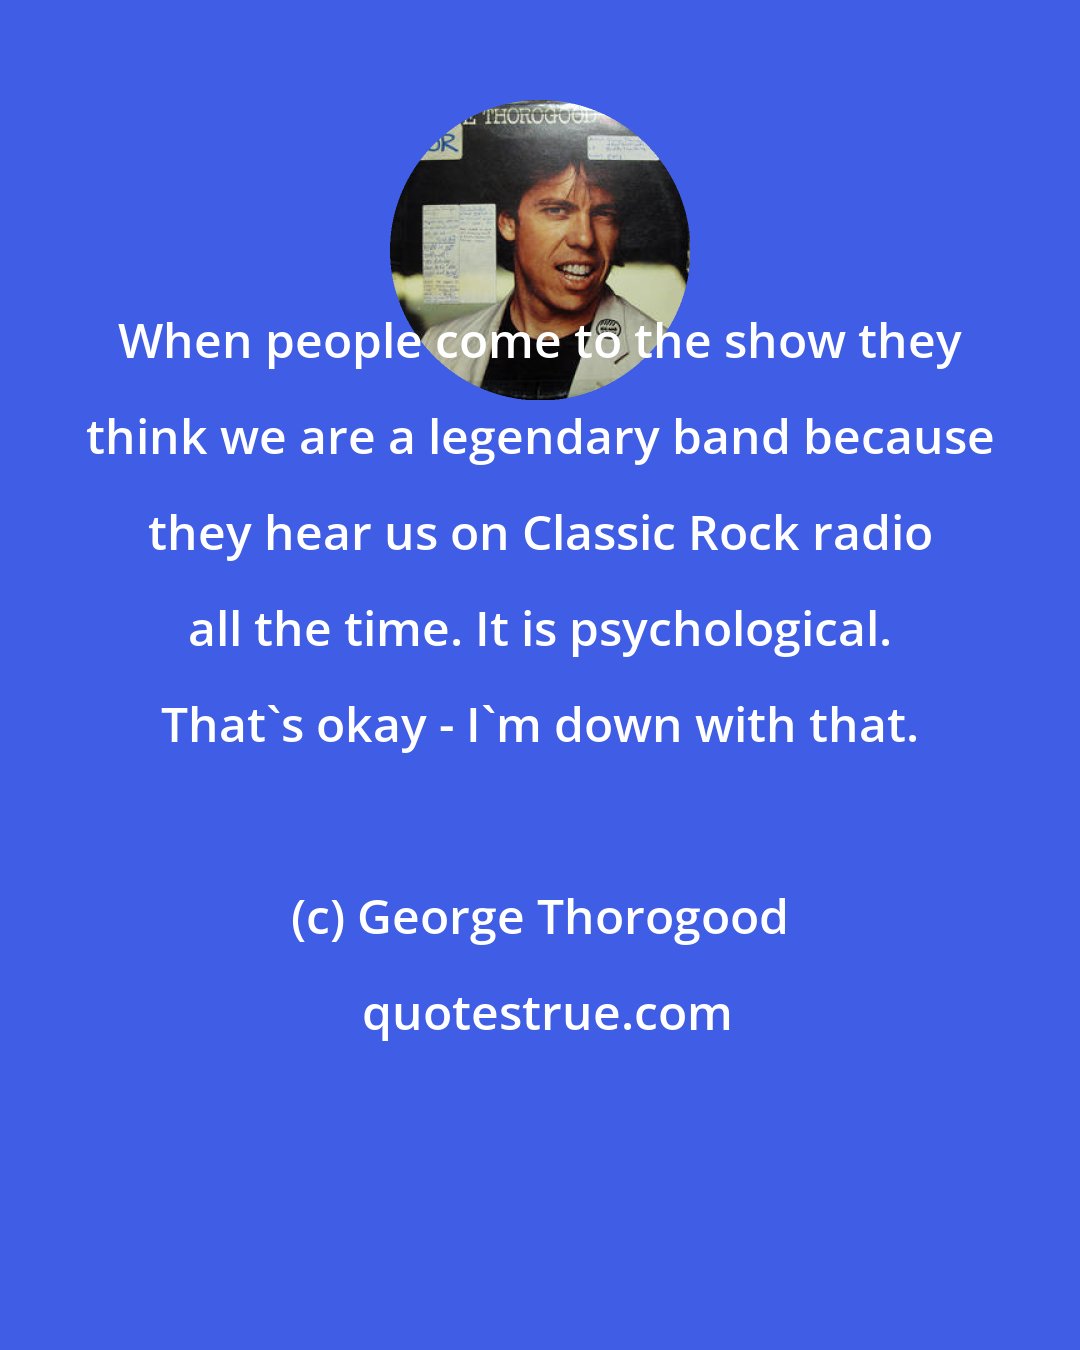 George Thorogood: When people come to the show they think we are a legendary band because they hear us on Classic Rock radio all the time. It is psychological. That's okay - I'm down with that.